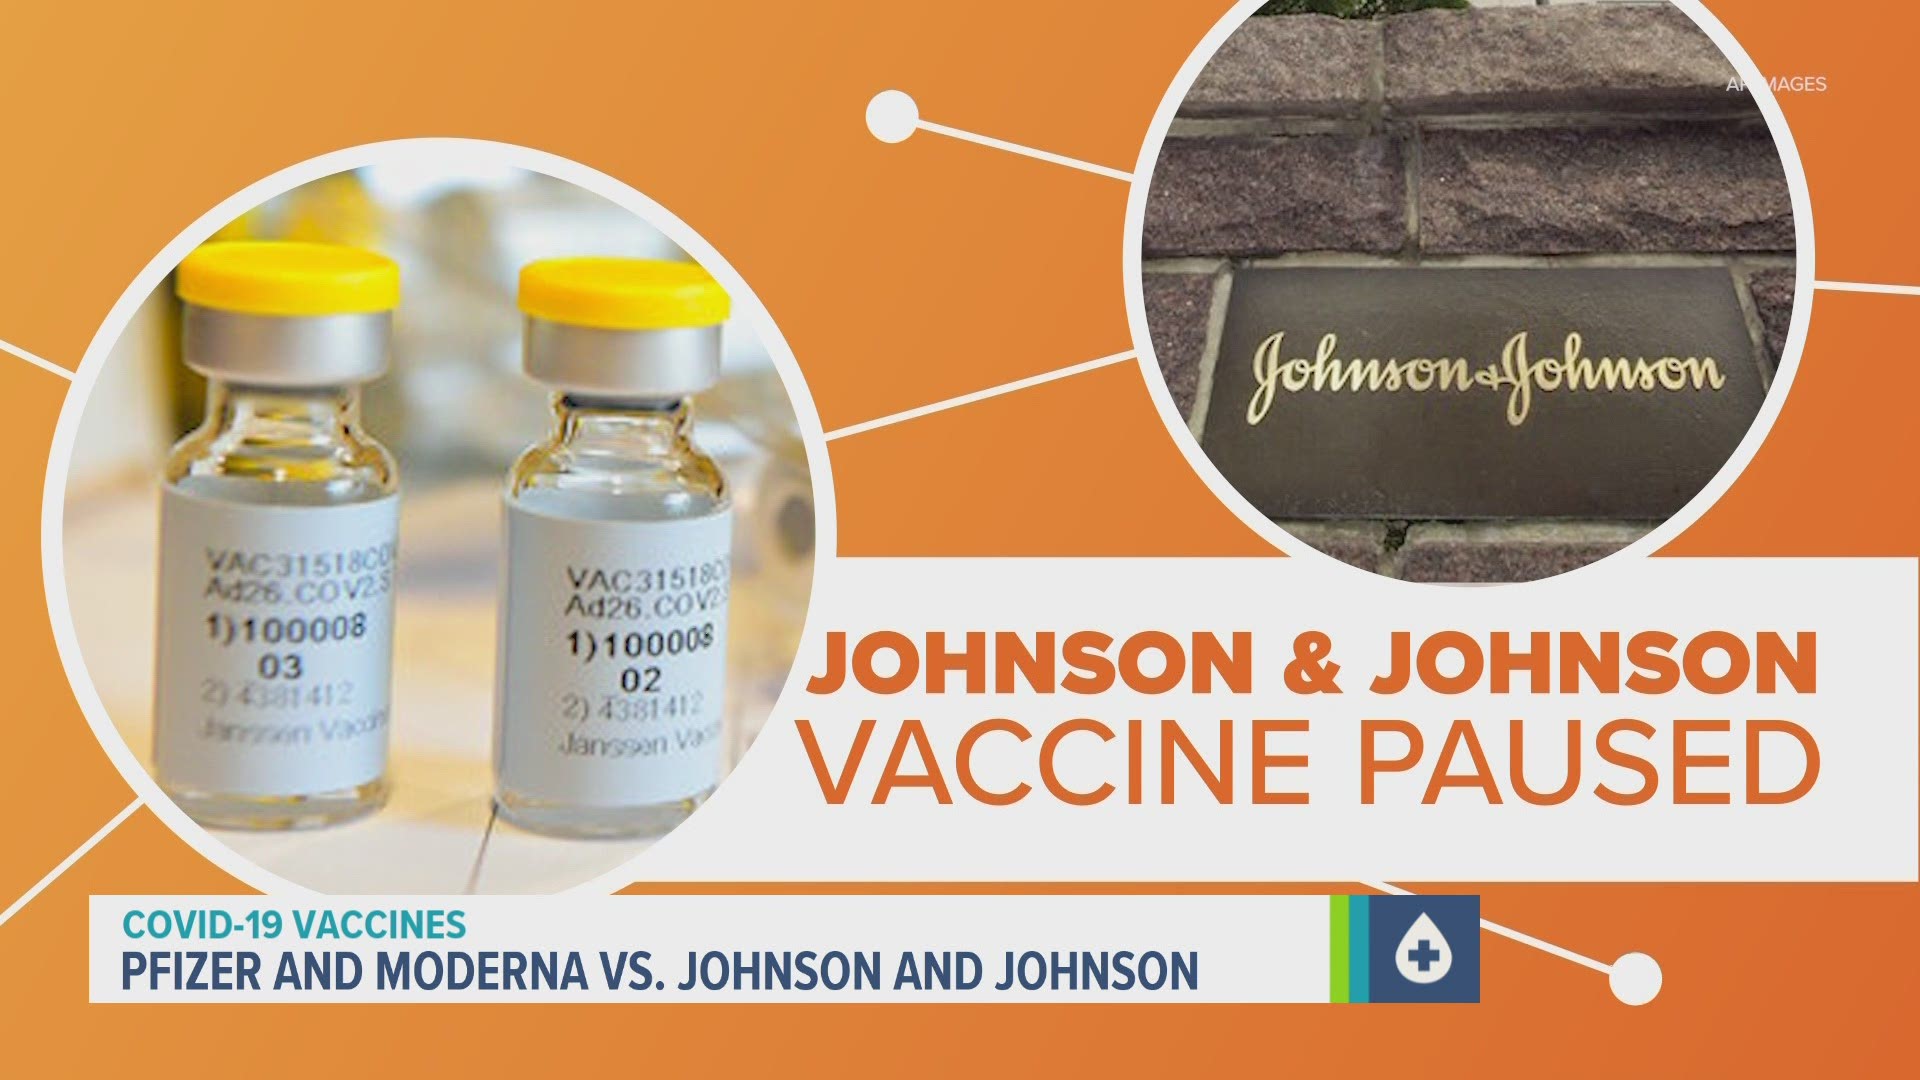 Pfizer and Moderna vaccines are still in use nationwide while J&J administration has been put on pause, could it be a fundamental difference between the three?